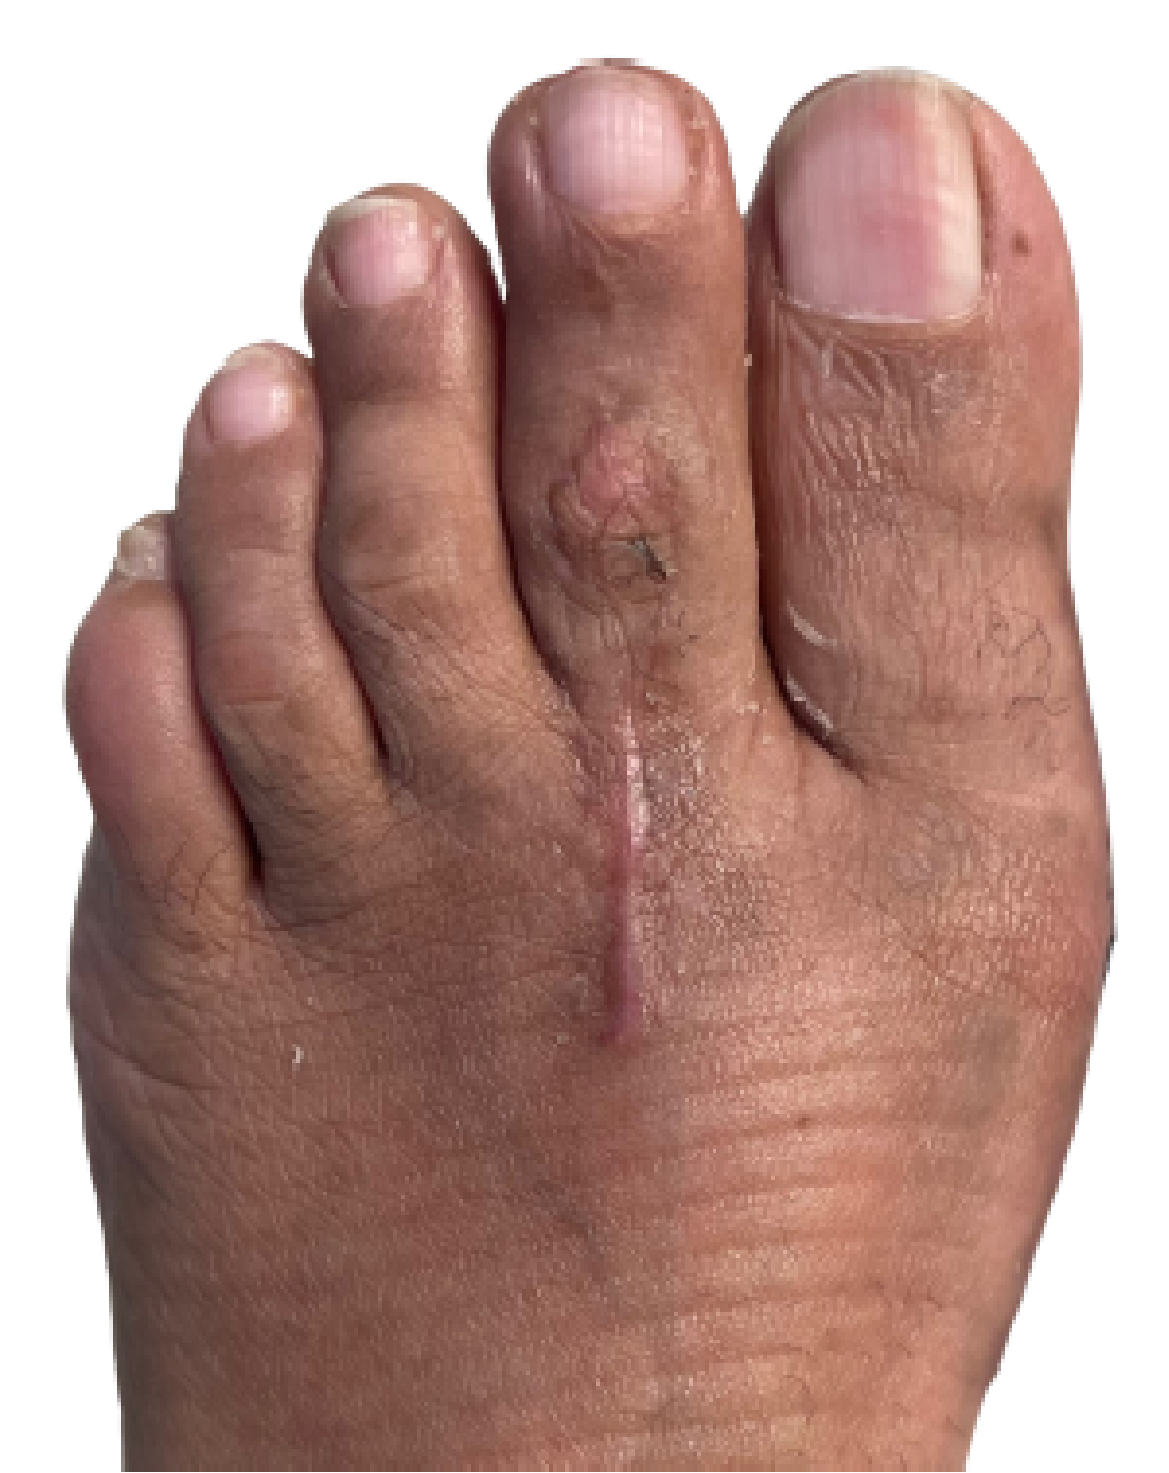 After Bunion and Toe Correction 